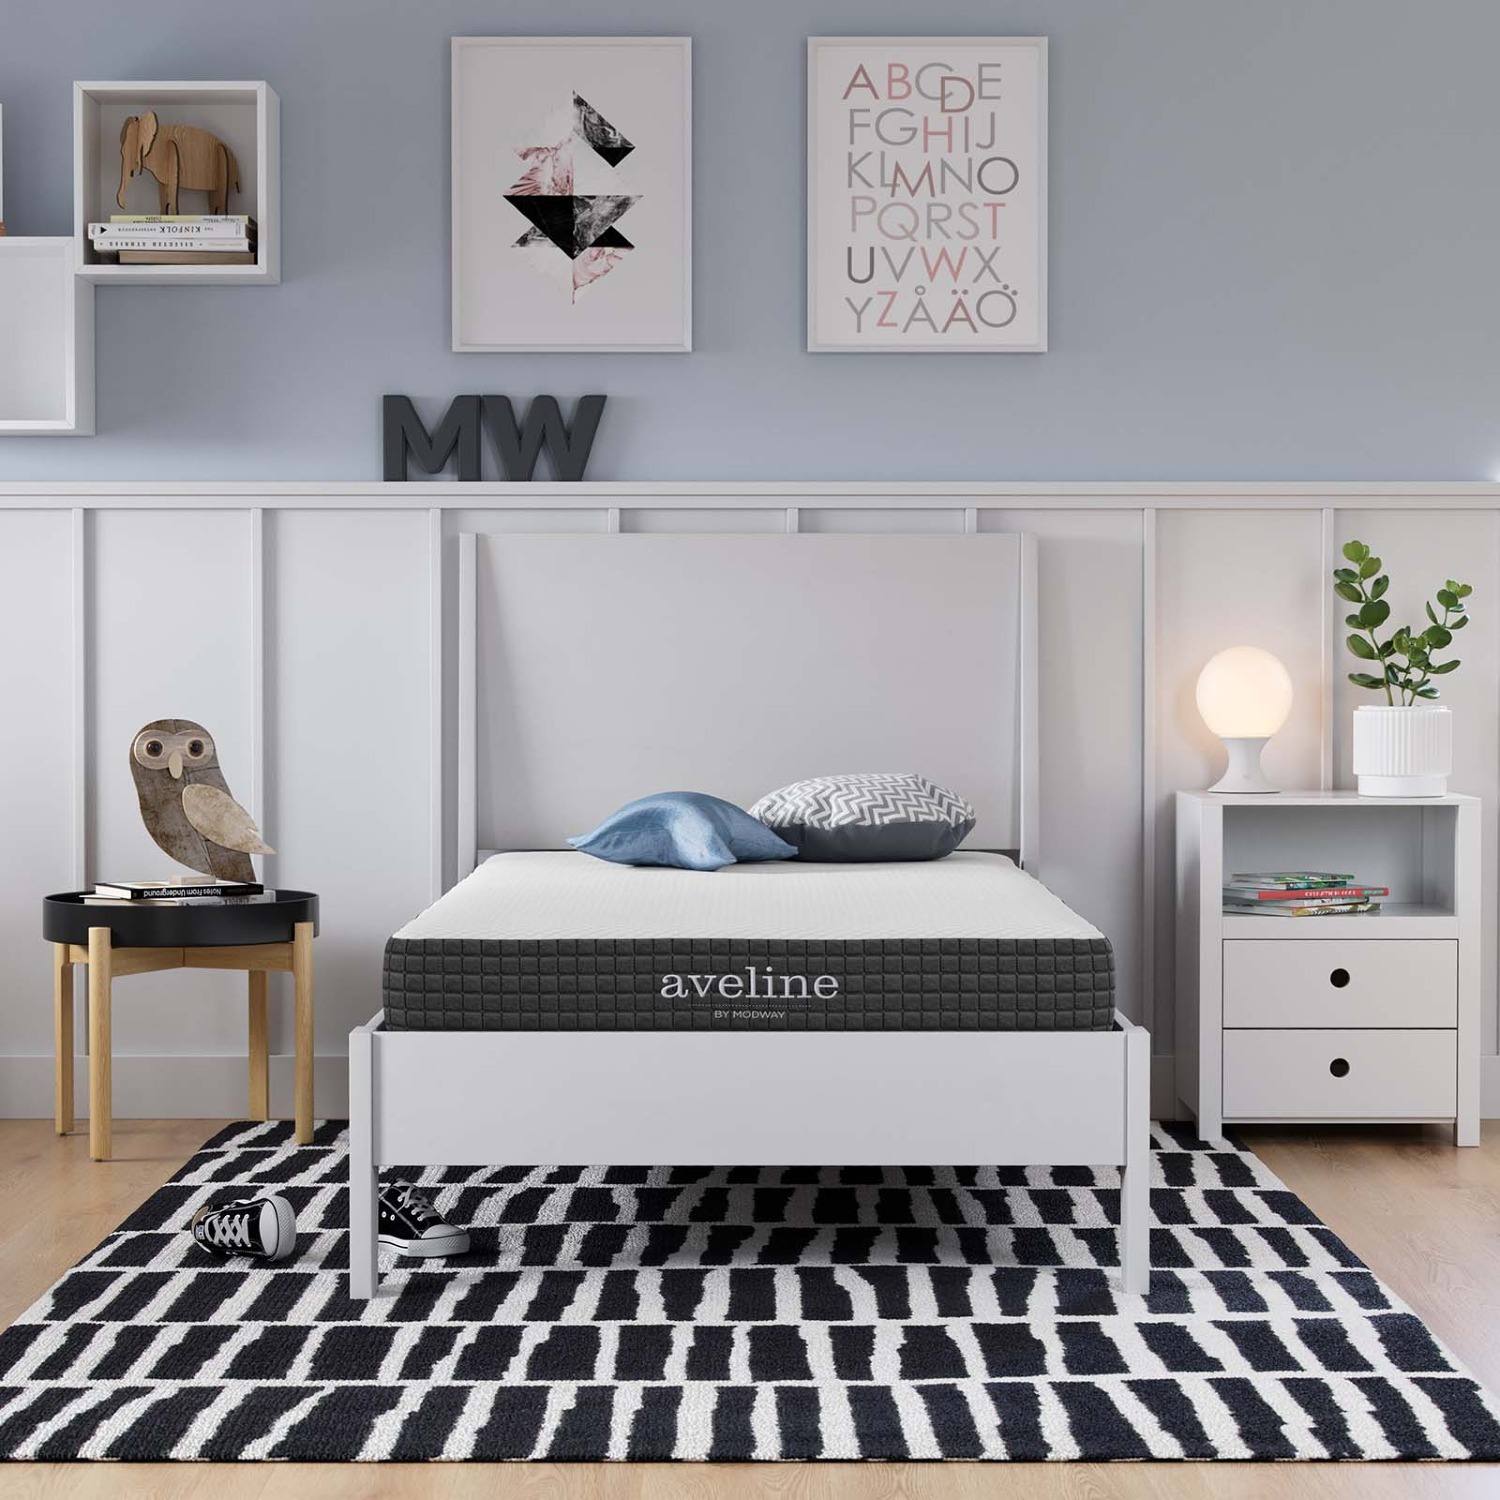 Modway Aveline Gel Infused Memory Mattress with CertiPUR-US Certified Foam, Twin Size $94 + Free Shipping